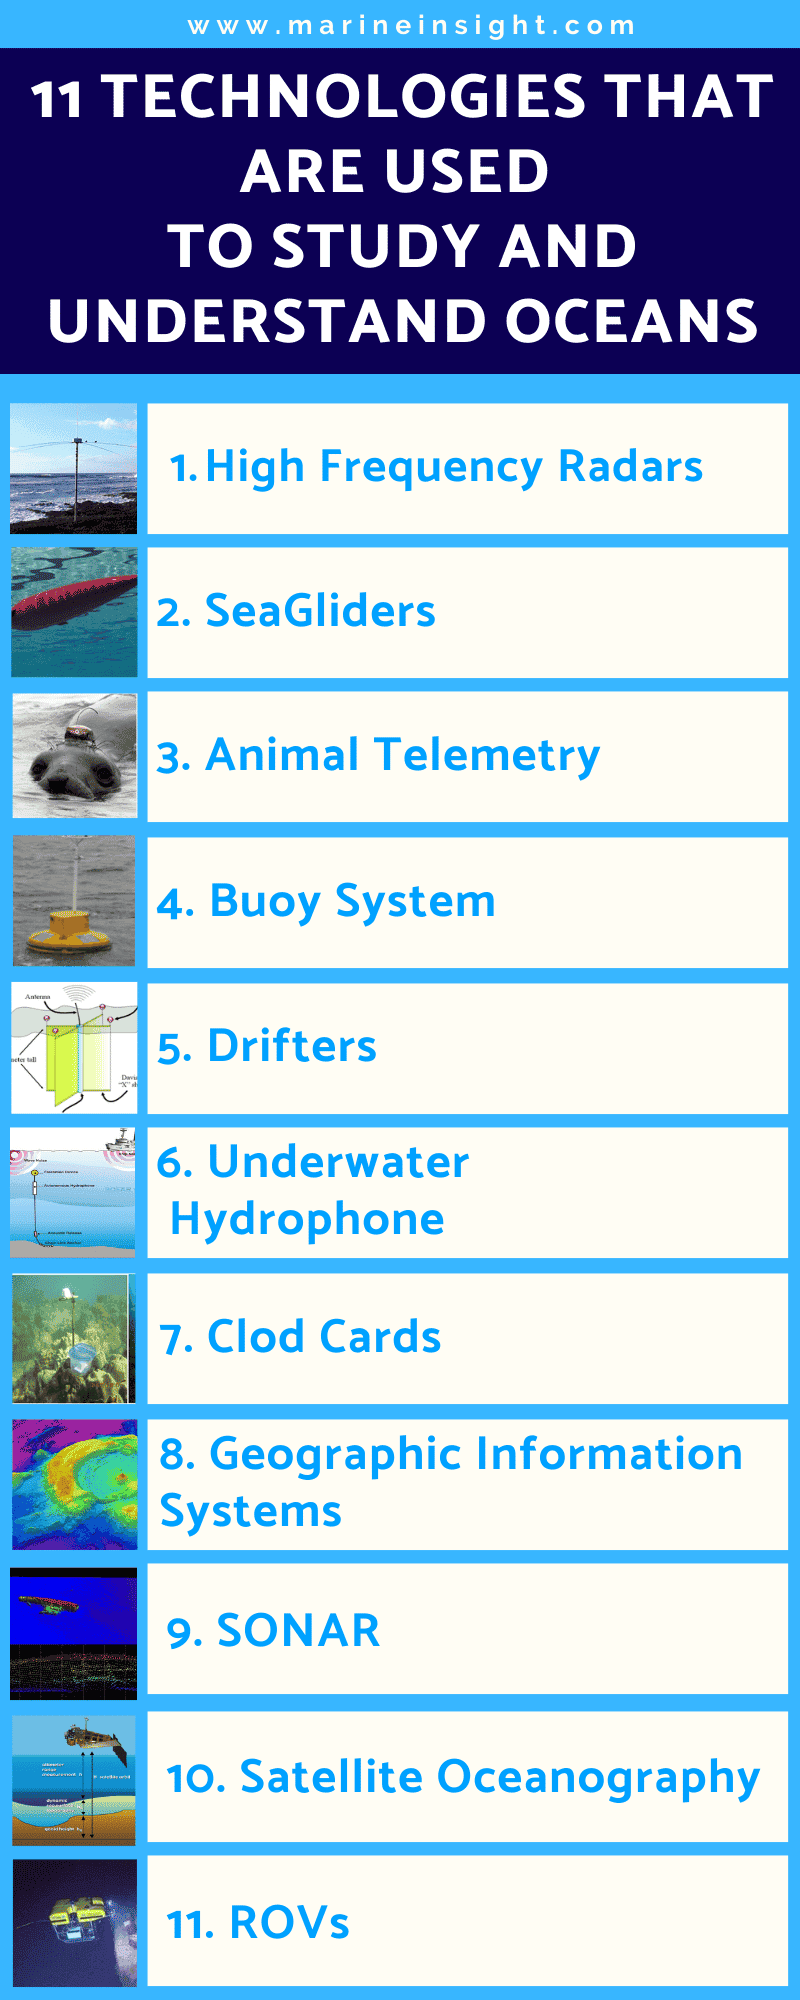 11 Technologies That Are Used To Study And Understand Oceans